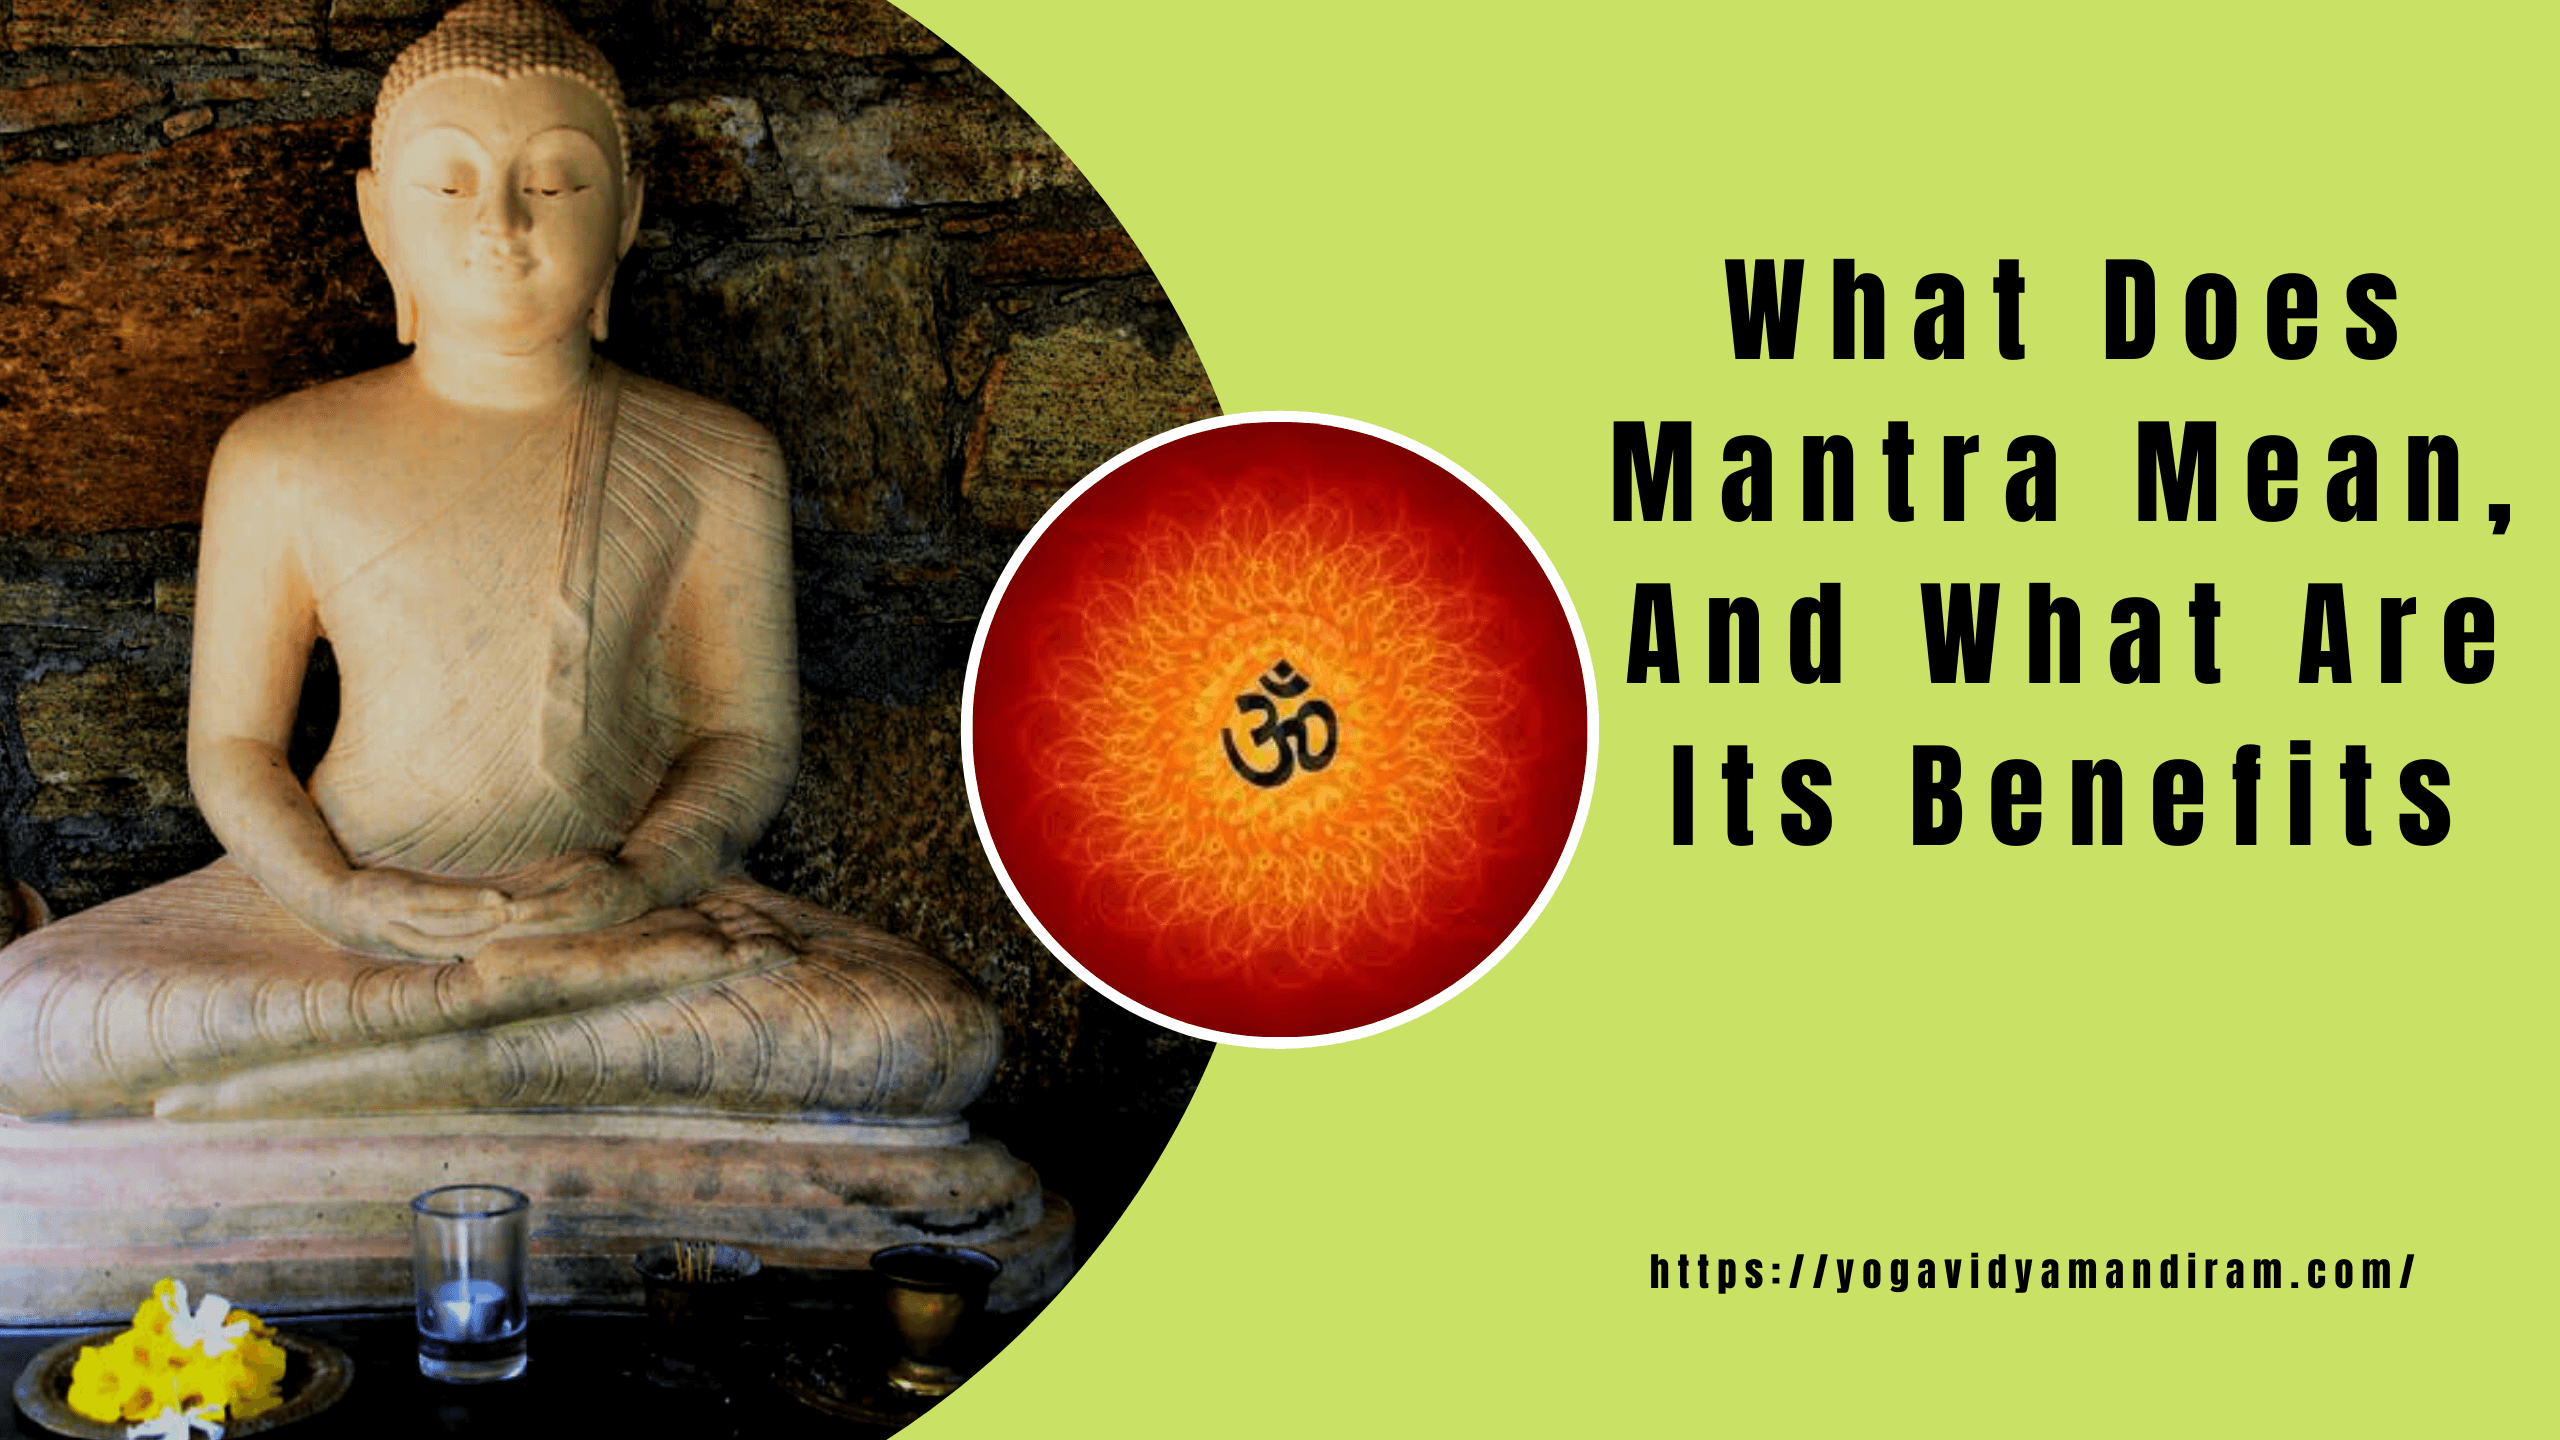 What Does Mantra Mean, And What Are Its Benefits?